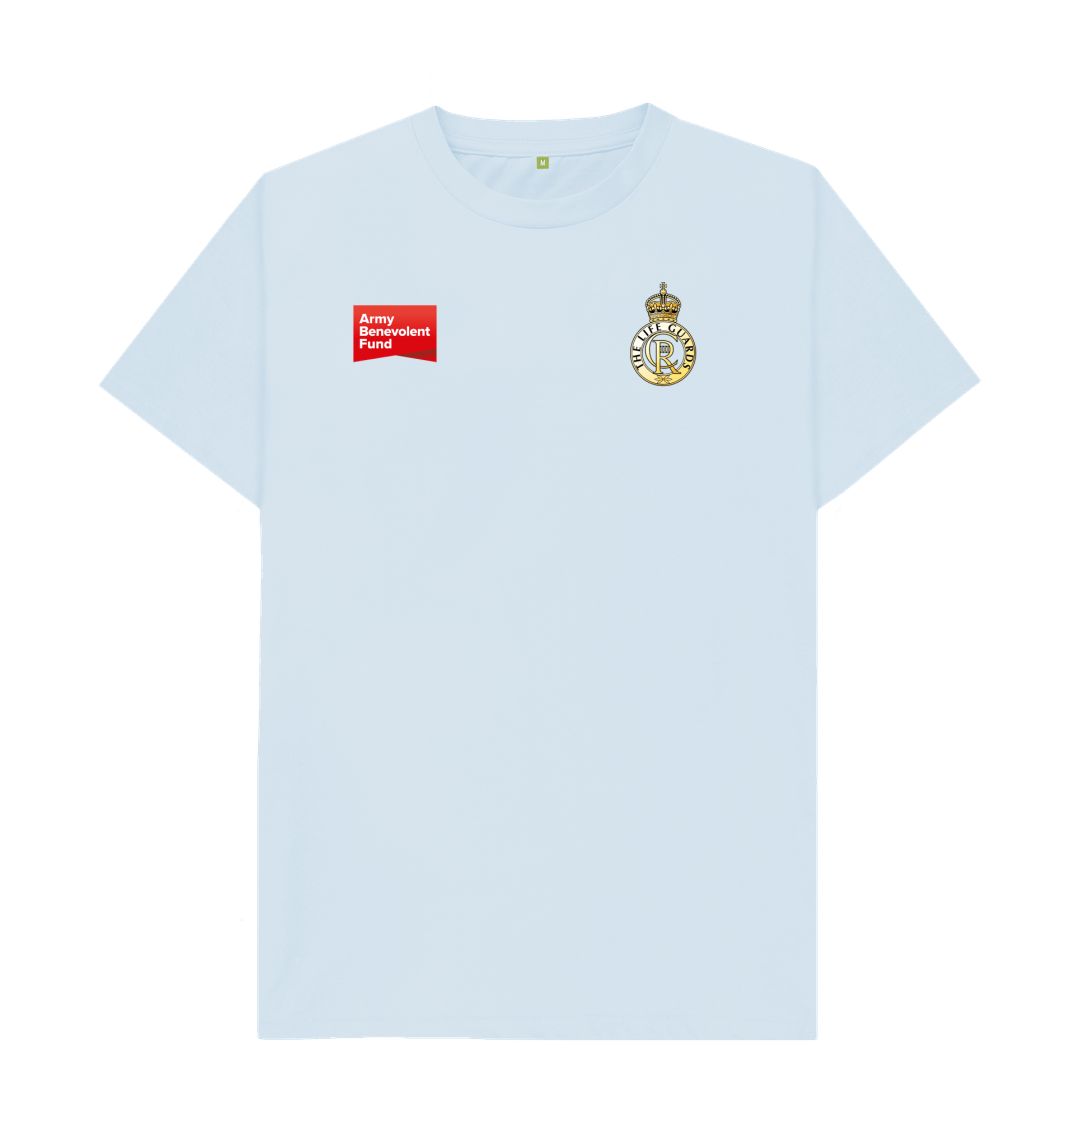 The Life Guards Unisex T-shirt - Army Benevolent Fund